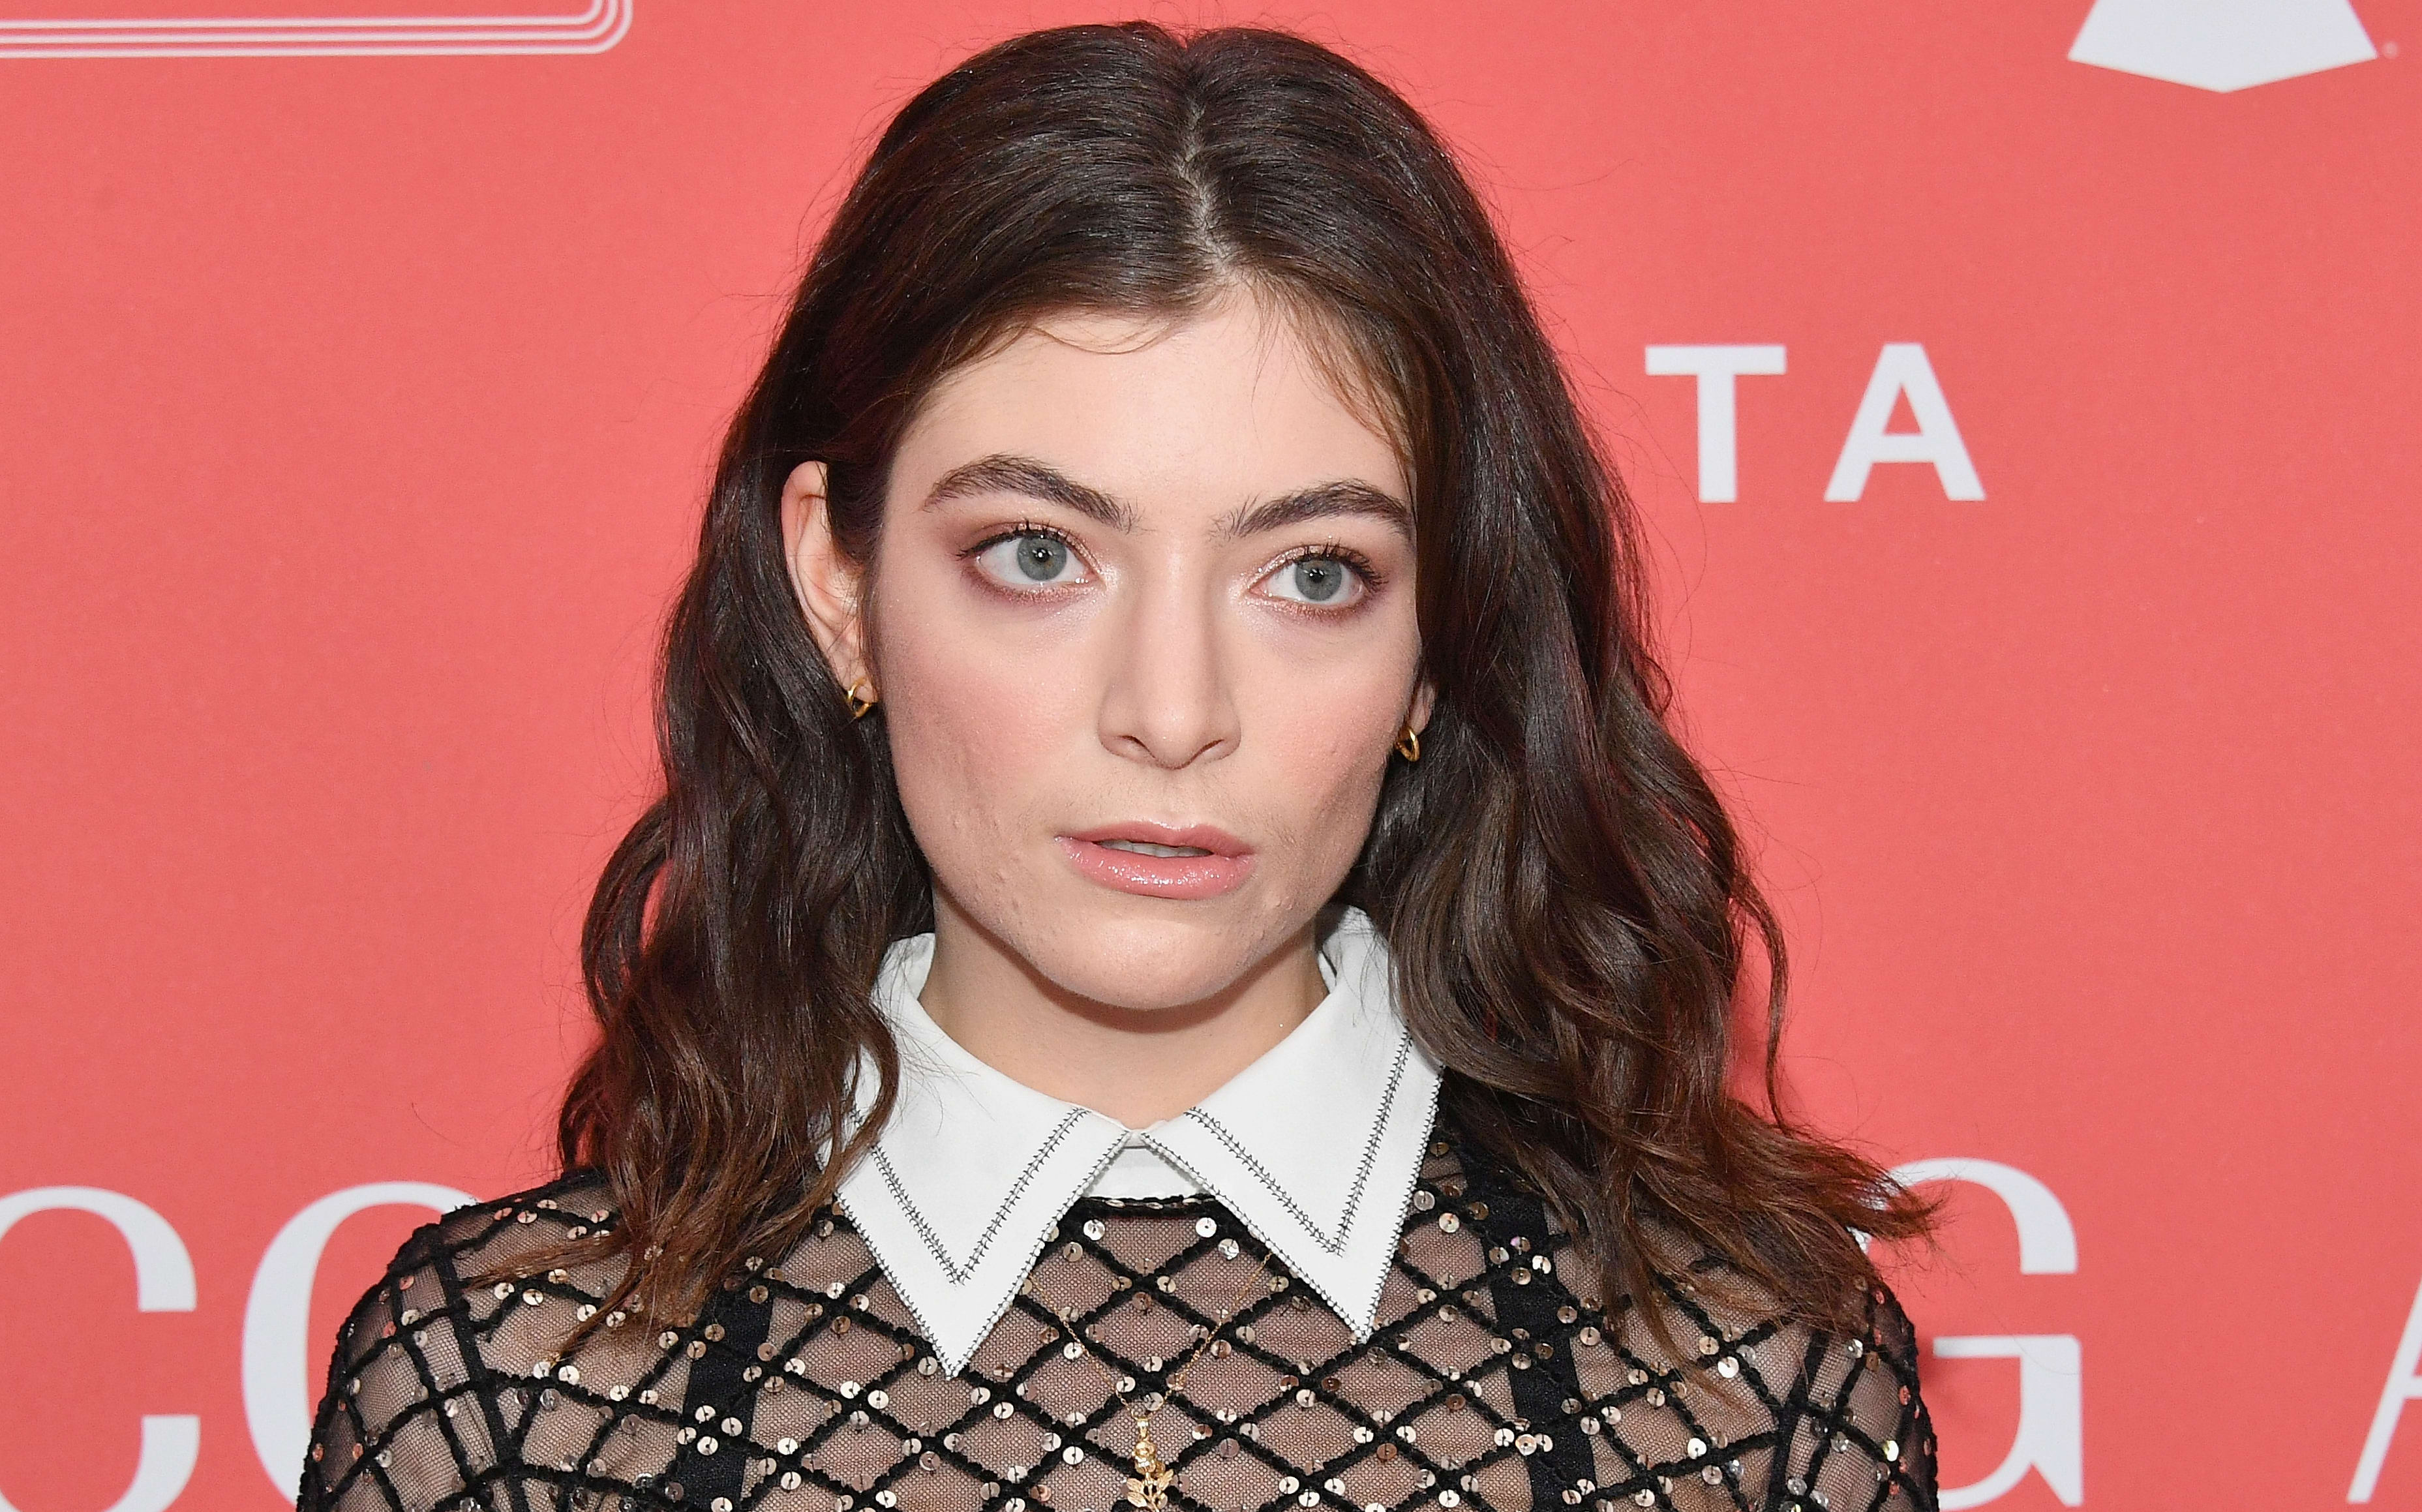 Singer Lorde attends MusiCares Person of the Year honoring Fleetwood Mac at Radio City Music Hall on January 26, 2018 in New York City.